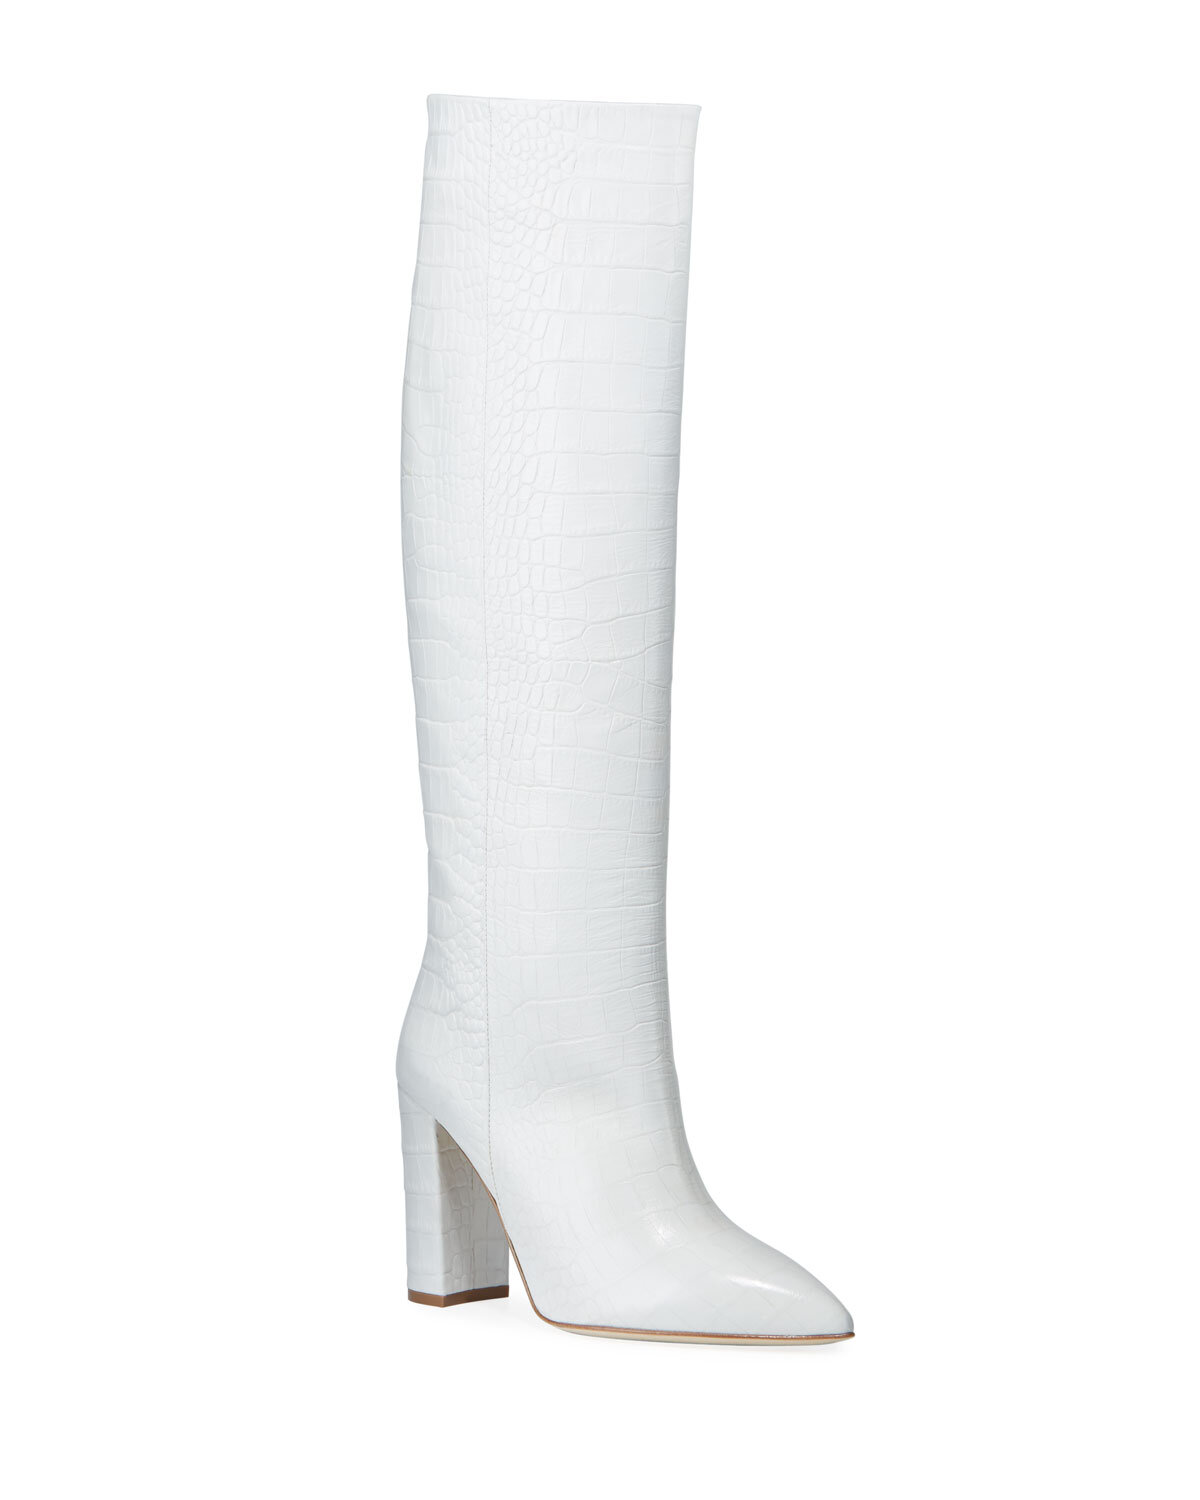 White Boots Are Officially A Wardrobe Fixture — LUXE OF BLUE